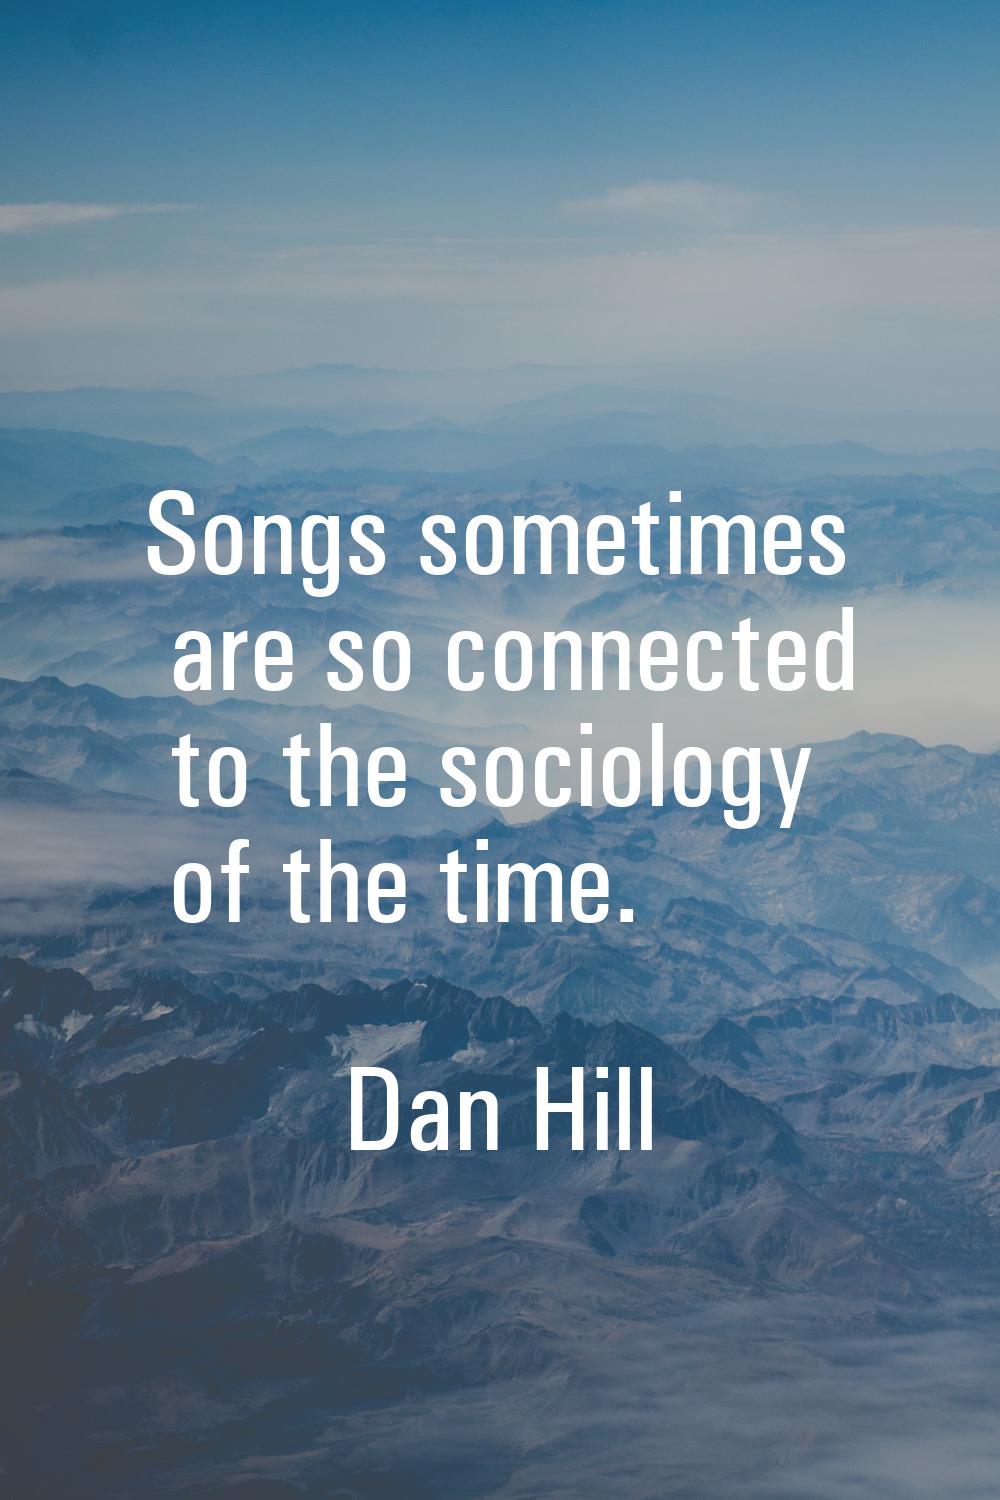 Songs sometimes are so connected to the sociology of the time.